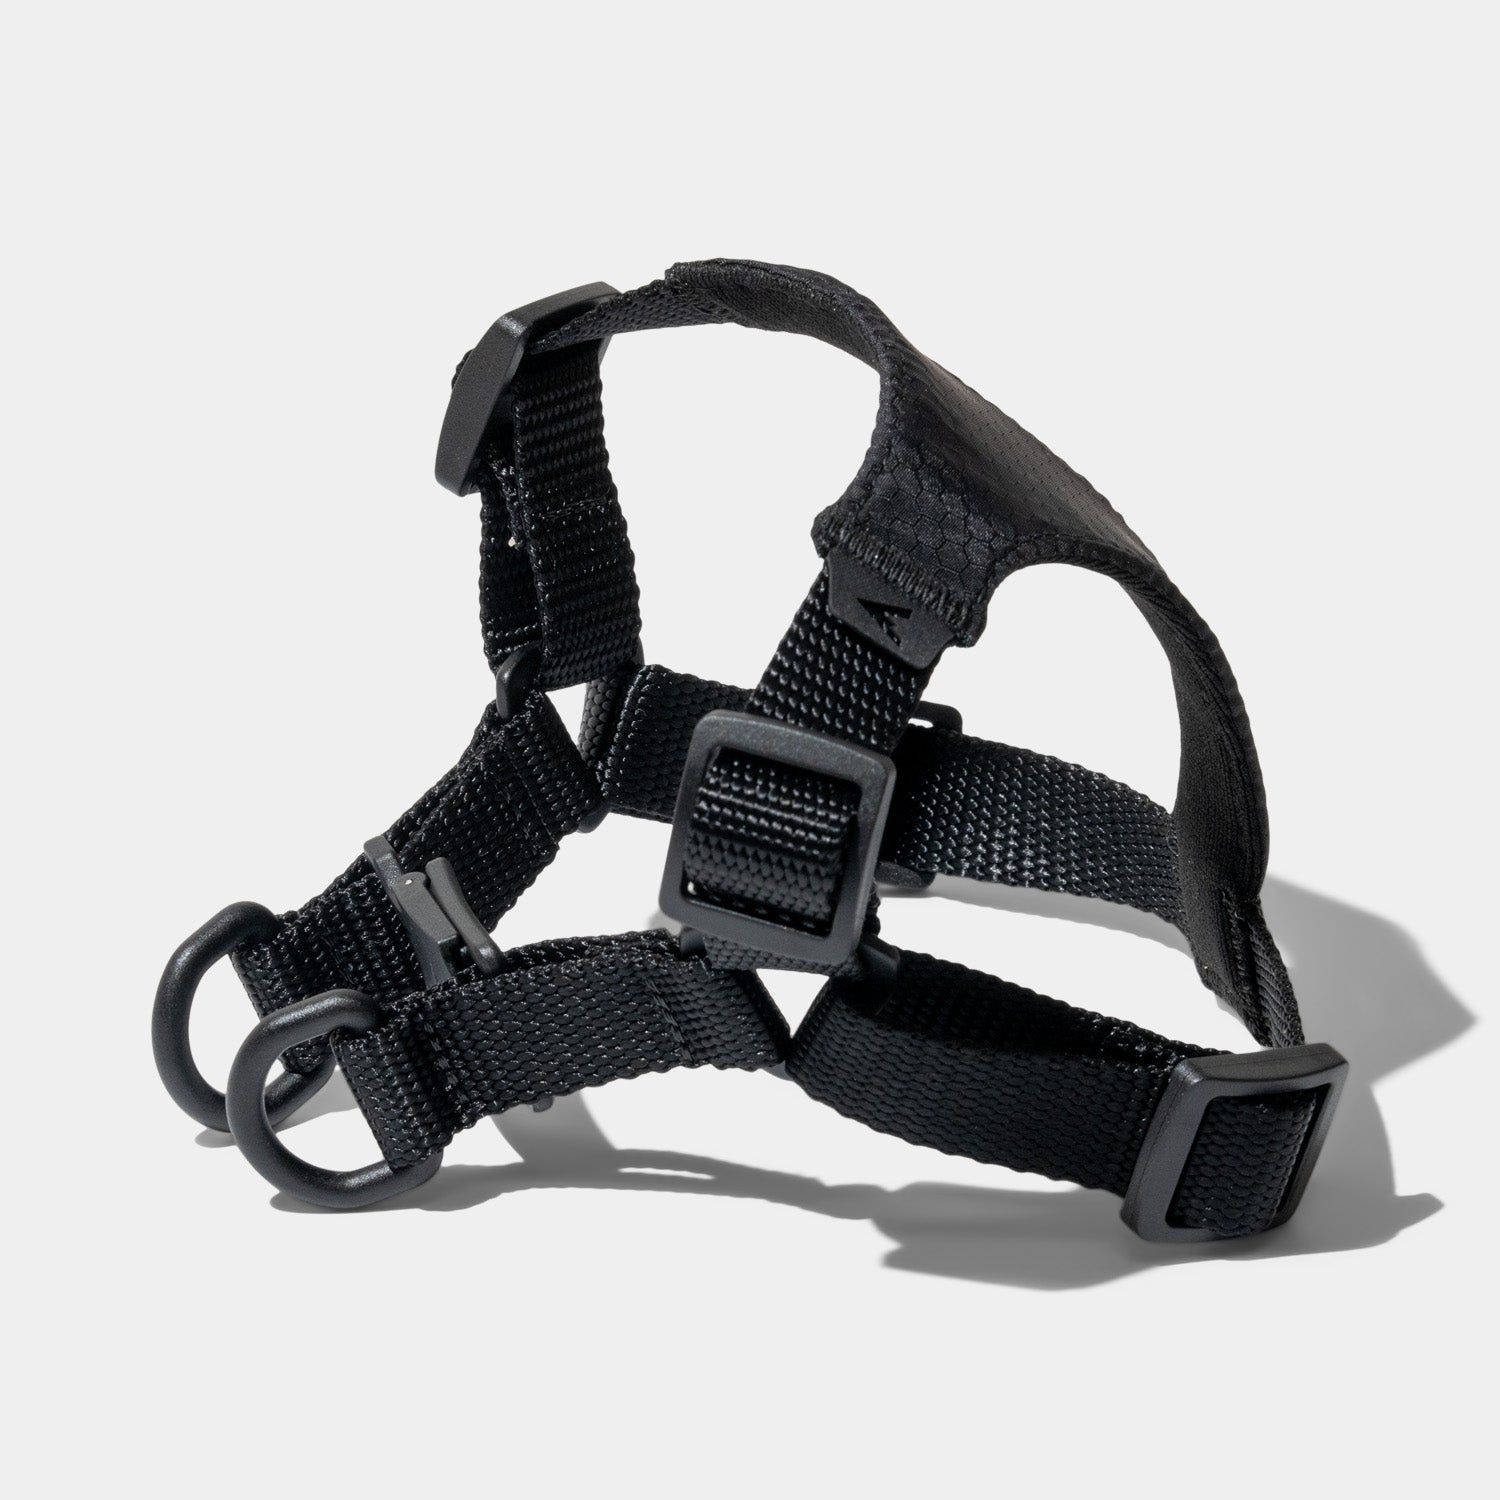 Atlas Pet Company Lifetime Air Harness for small dogs built from ultra breathable materials and guaranteed for life